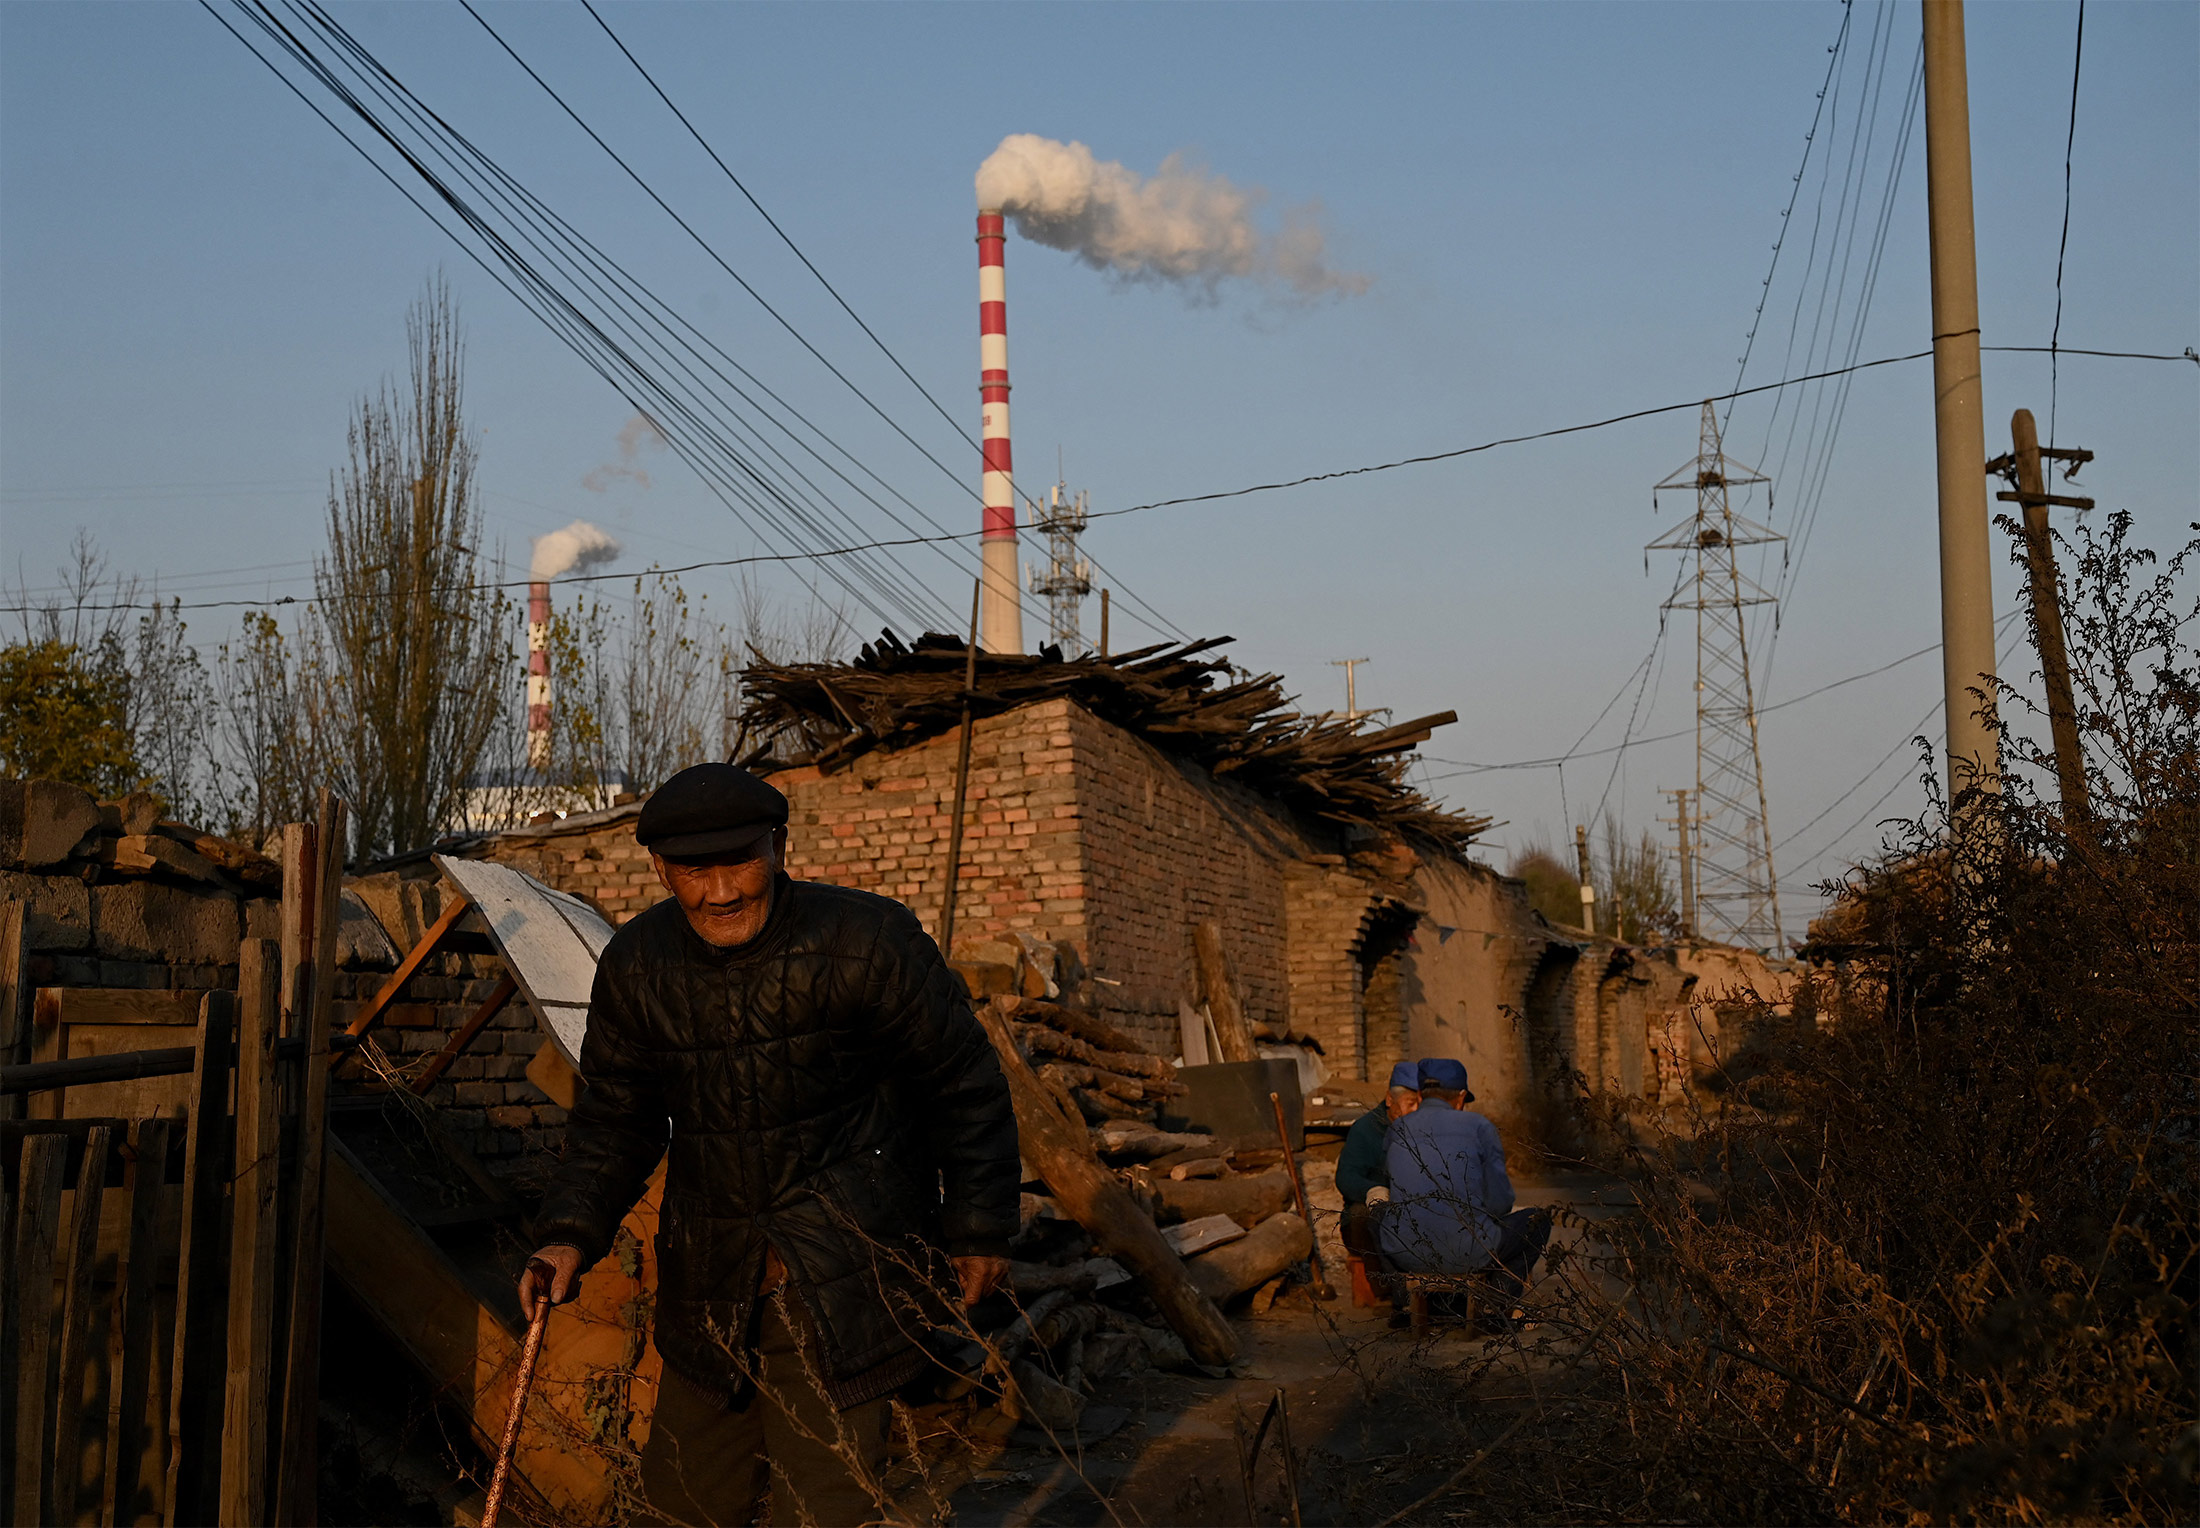 Smoke rises from a coal-fired power station near Datong&nbsp;in China's Shanxi province on Nov. 2.&nbsp;